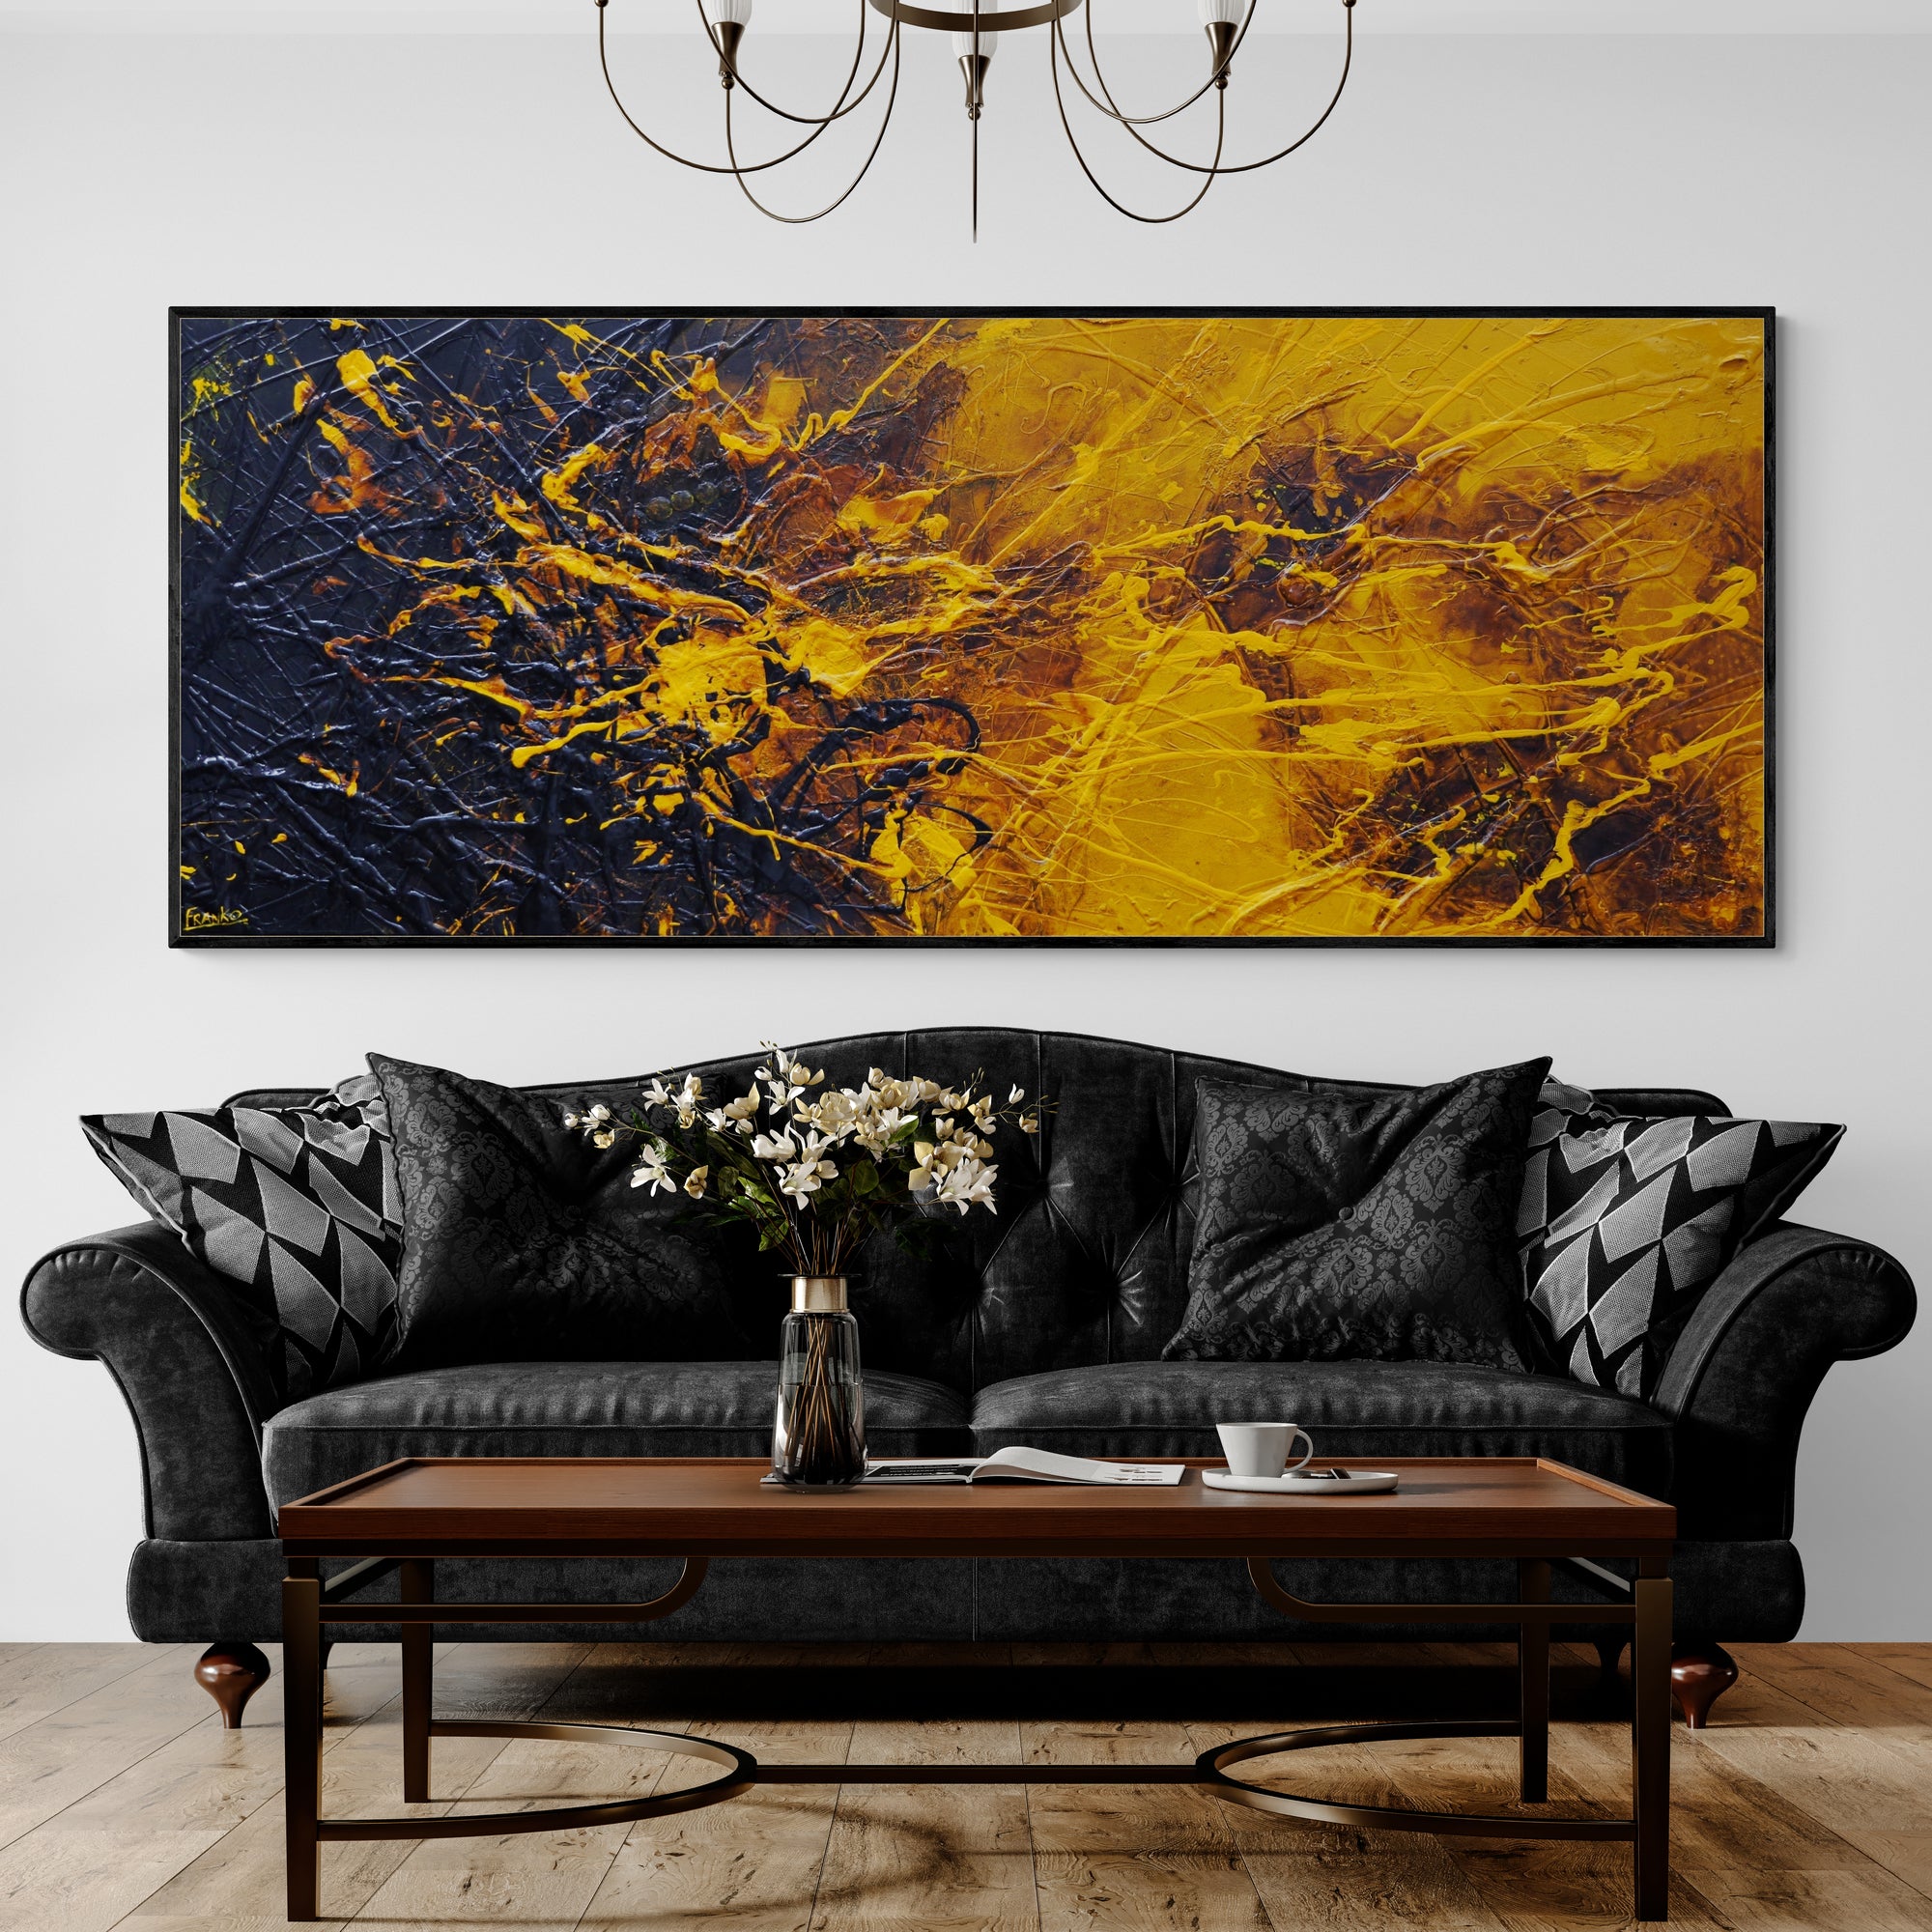 Honey and Sunflower 200cm x 80cm Black Yellow Textured Abstract Painting